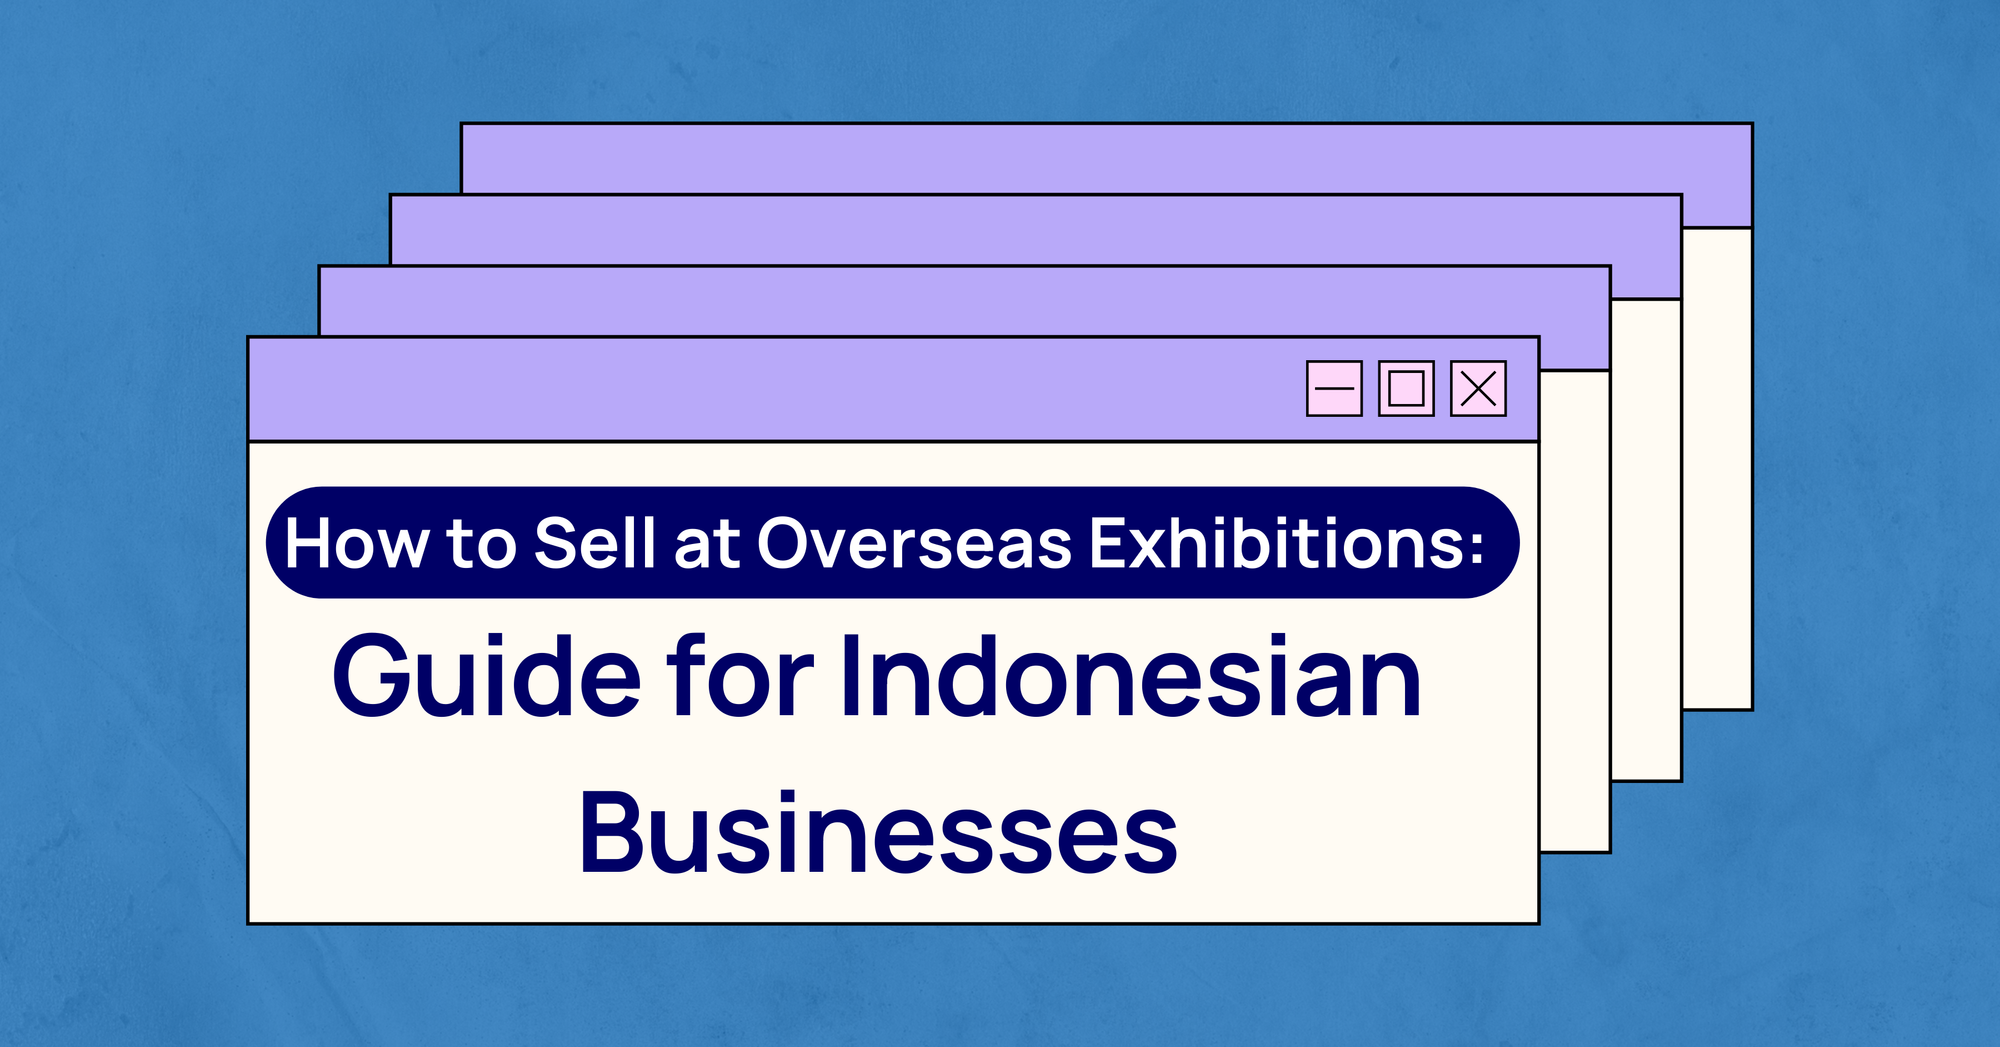 How to Sell at Overseas Exhibitions: Guide for Indonesian Businesses